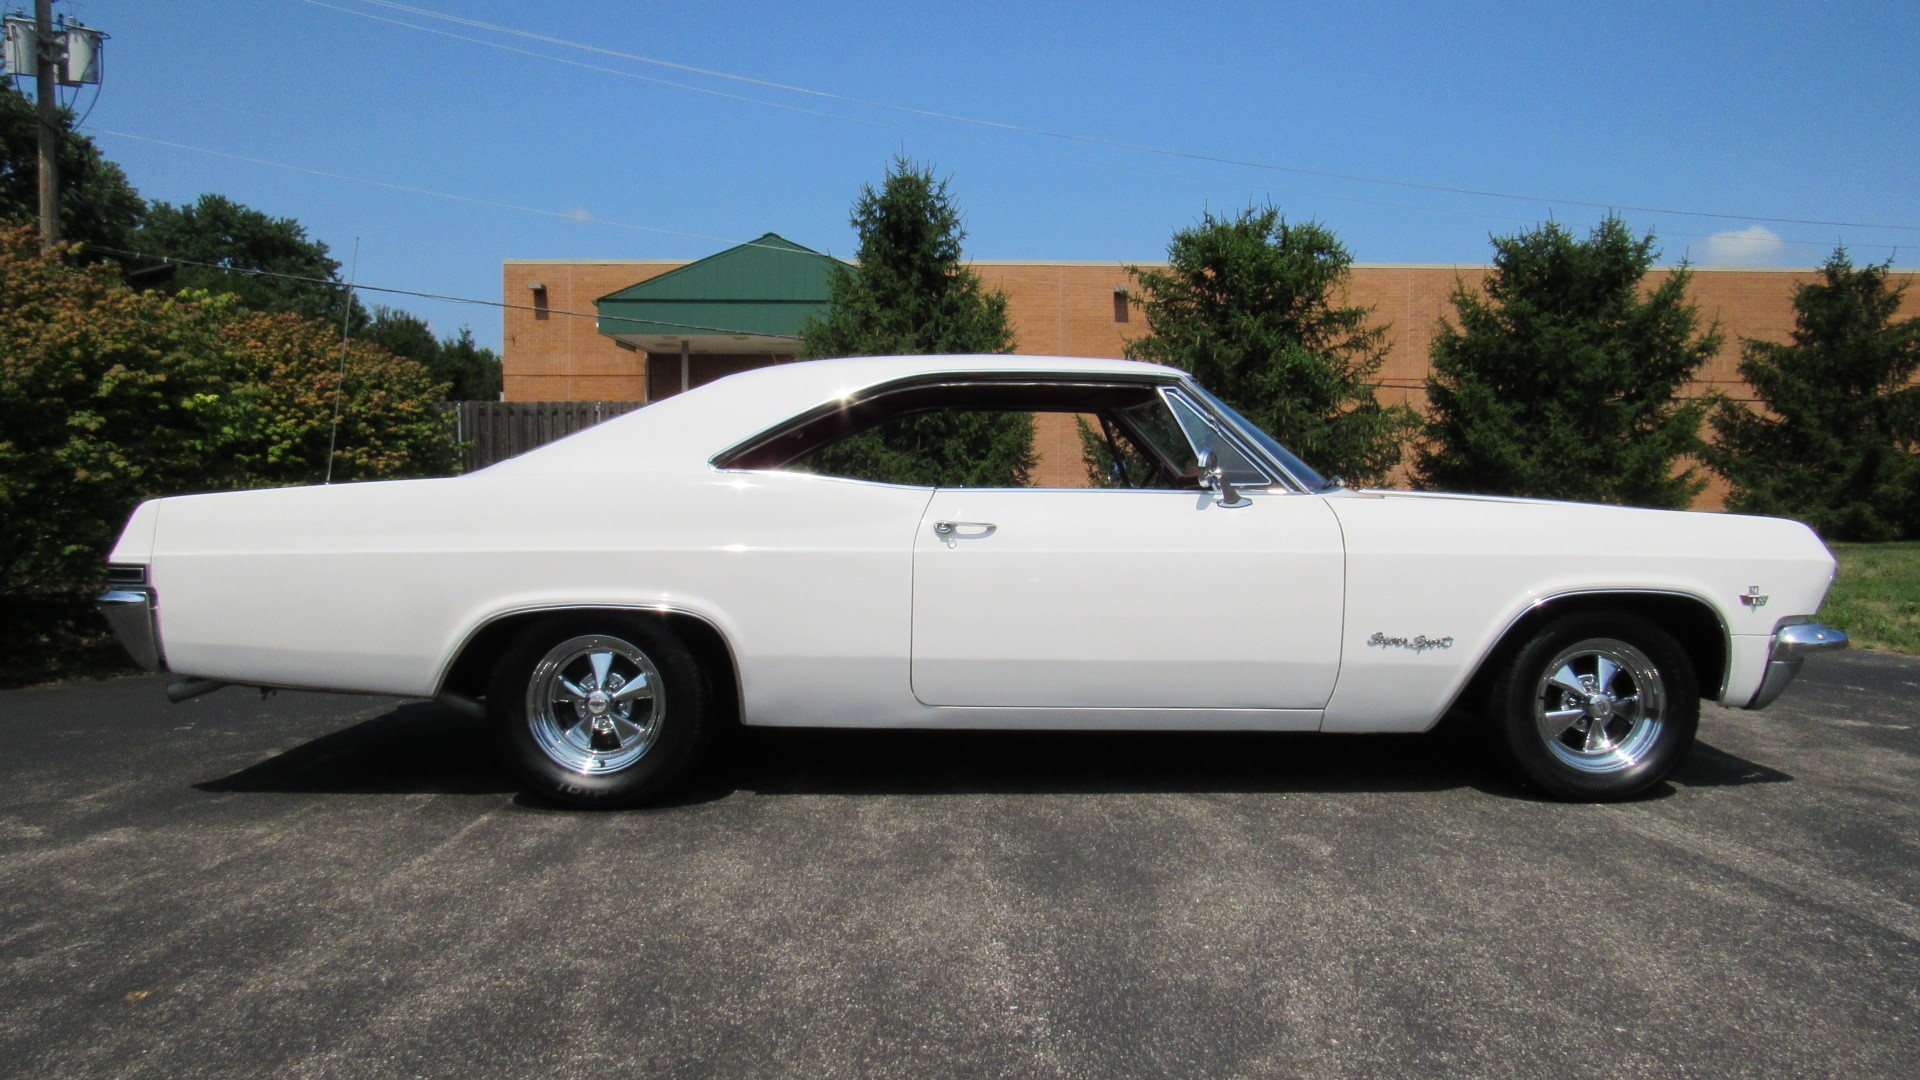 1965 Chevy Impala SS, 4 Speed, 327, Restored, SOLD!